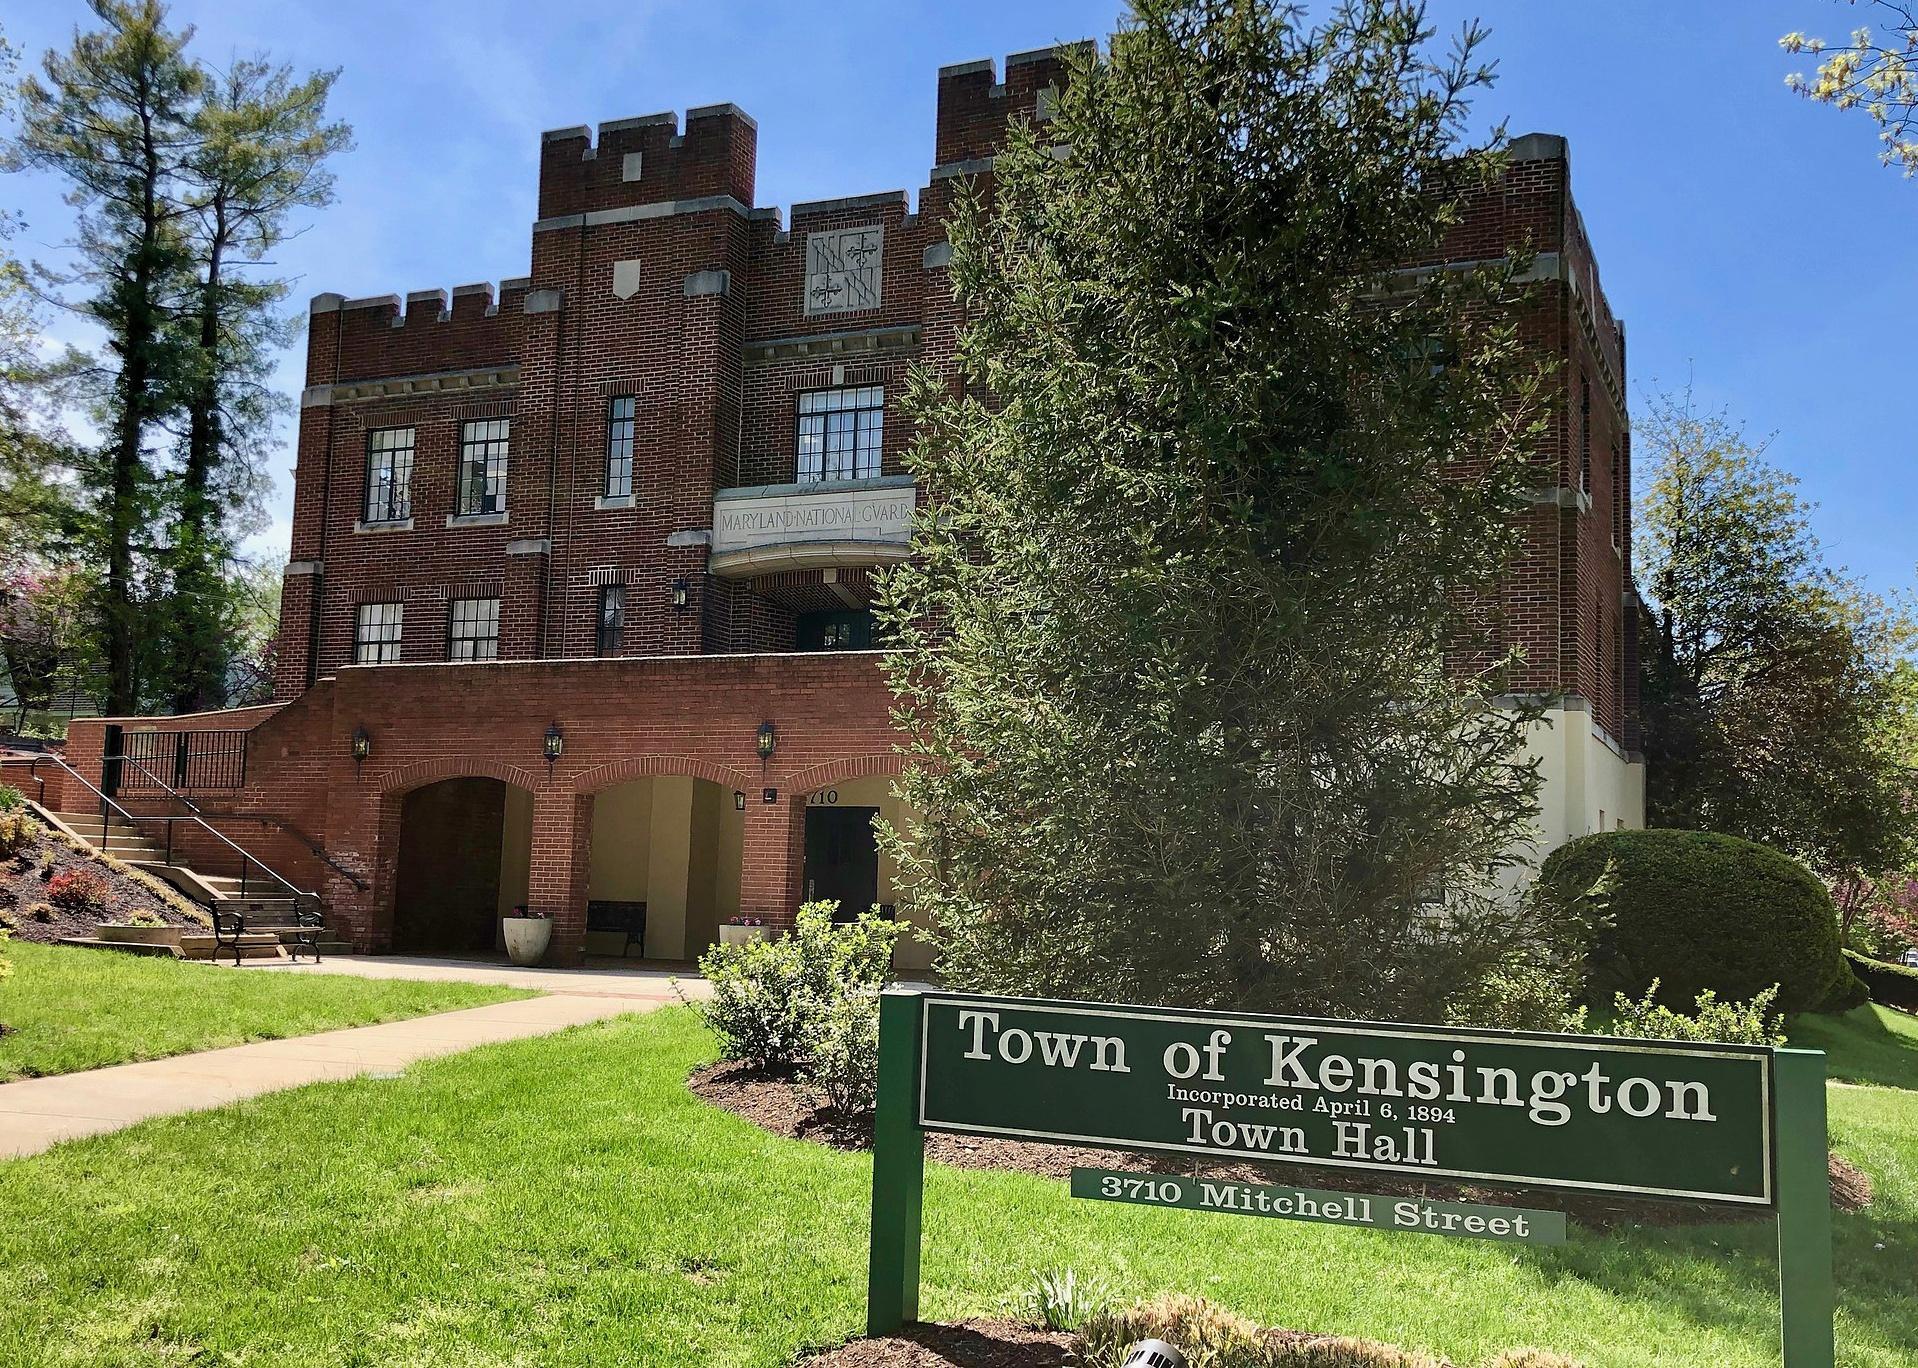 A red brick town hall with a green Kensington sign.